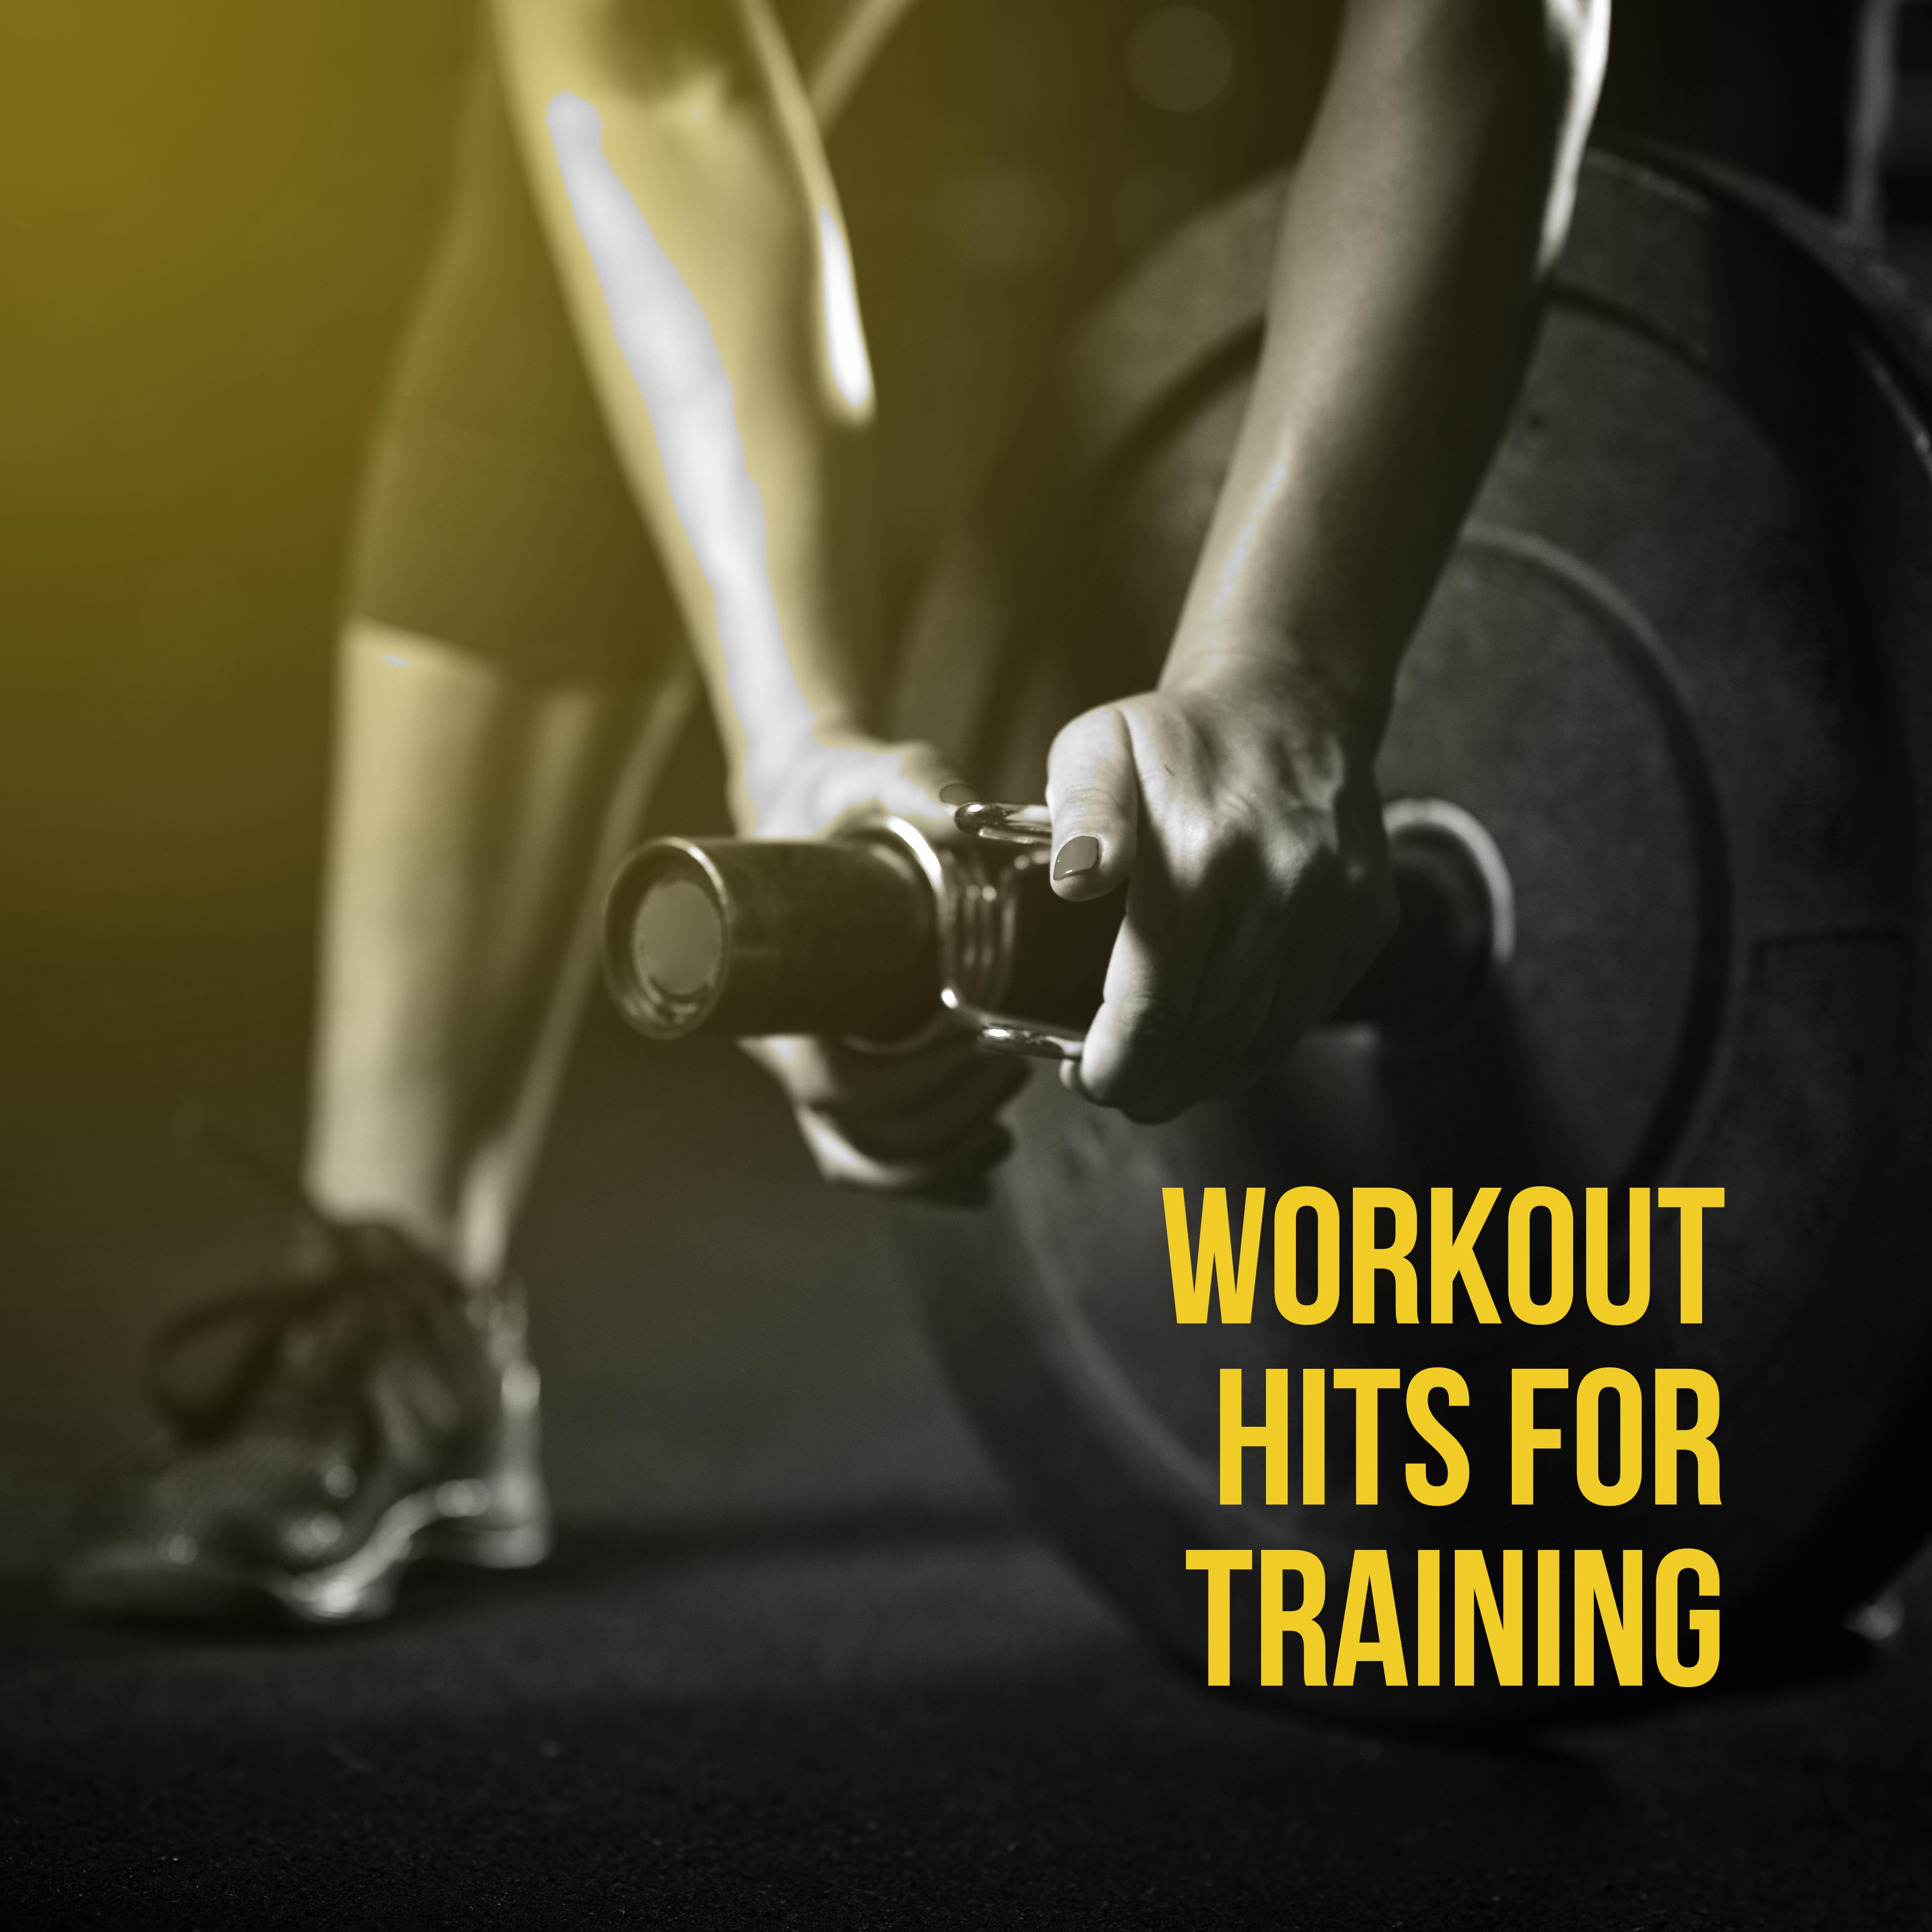 Workout Hits for Training